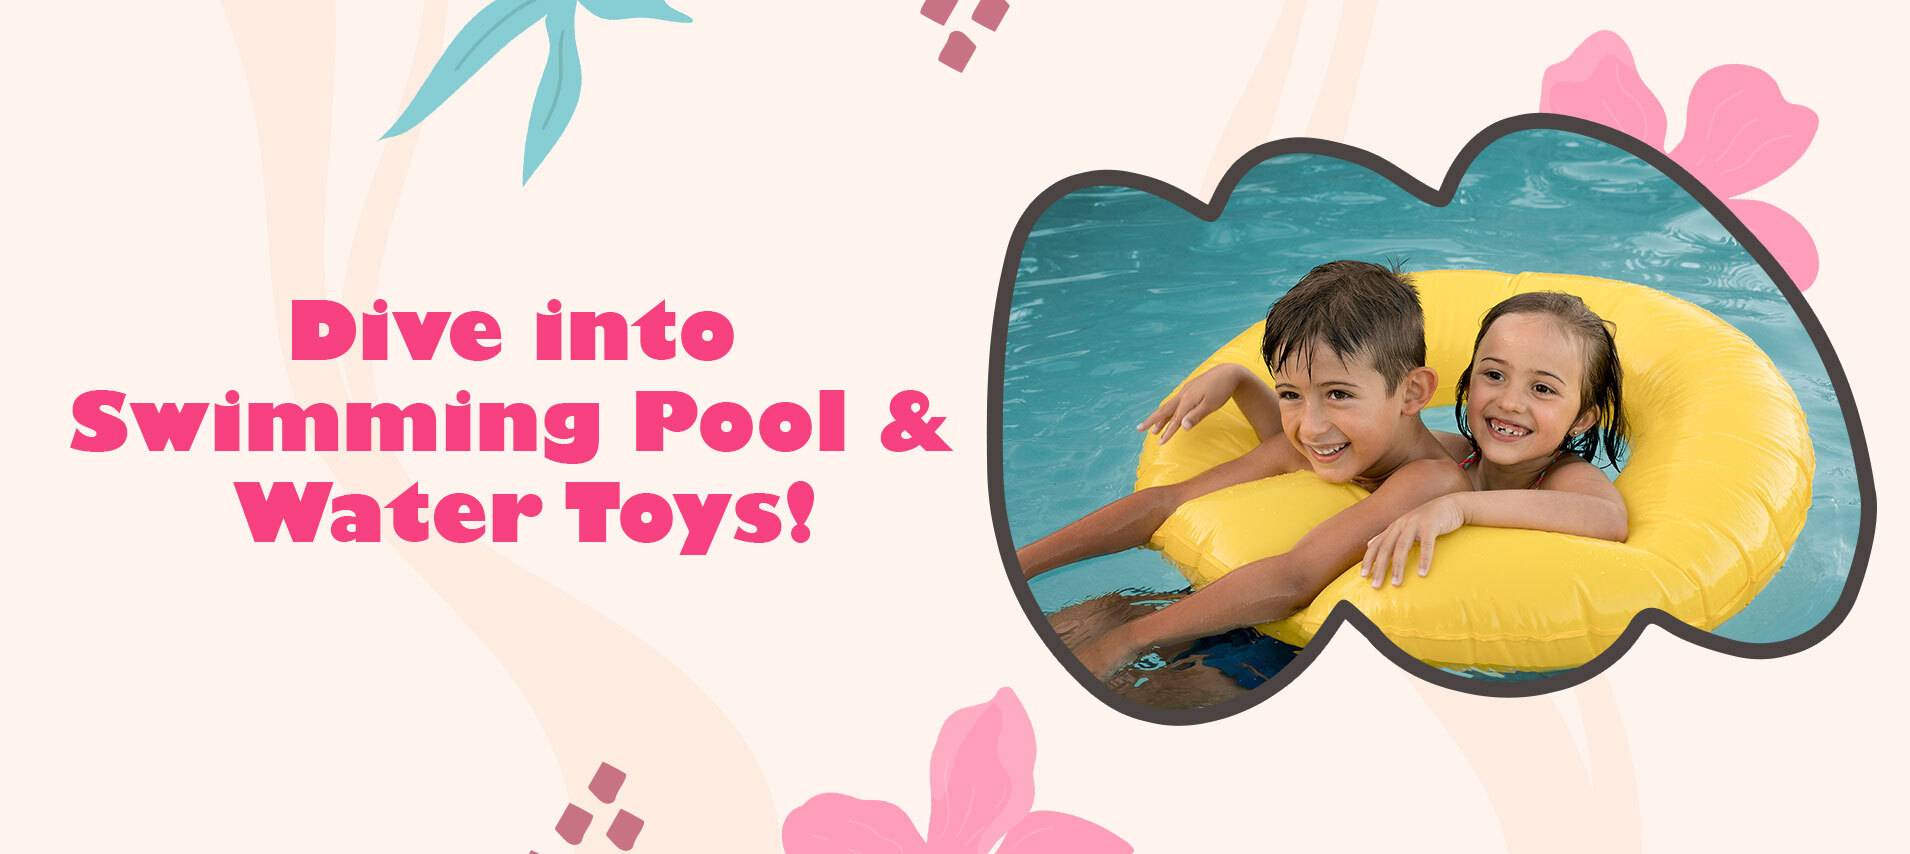 swimmg pool water toys